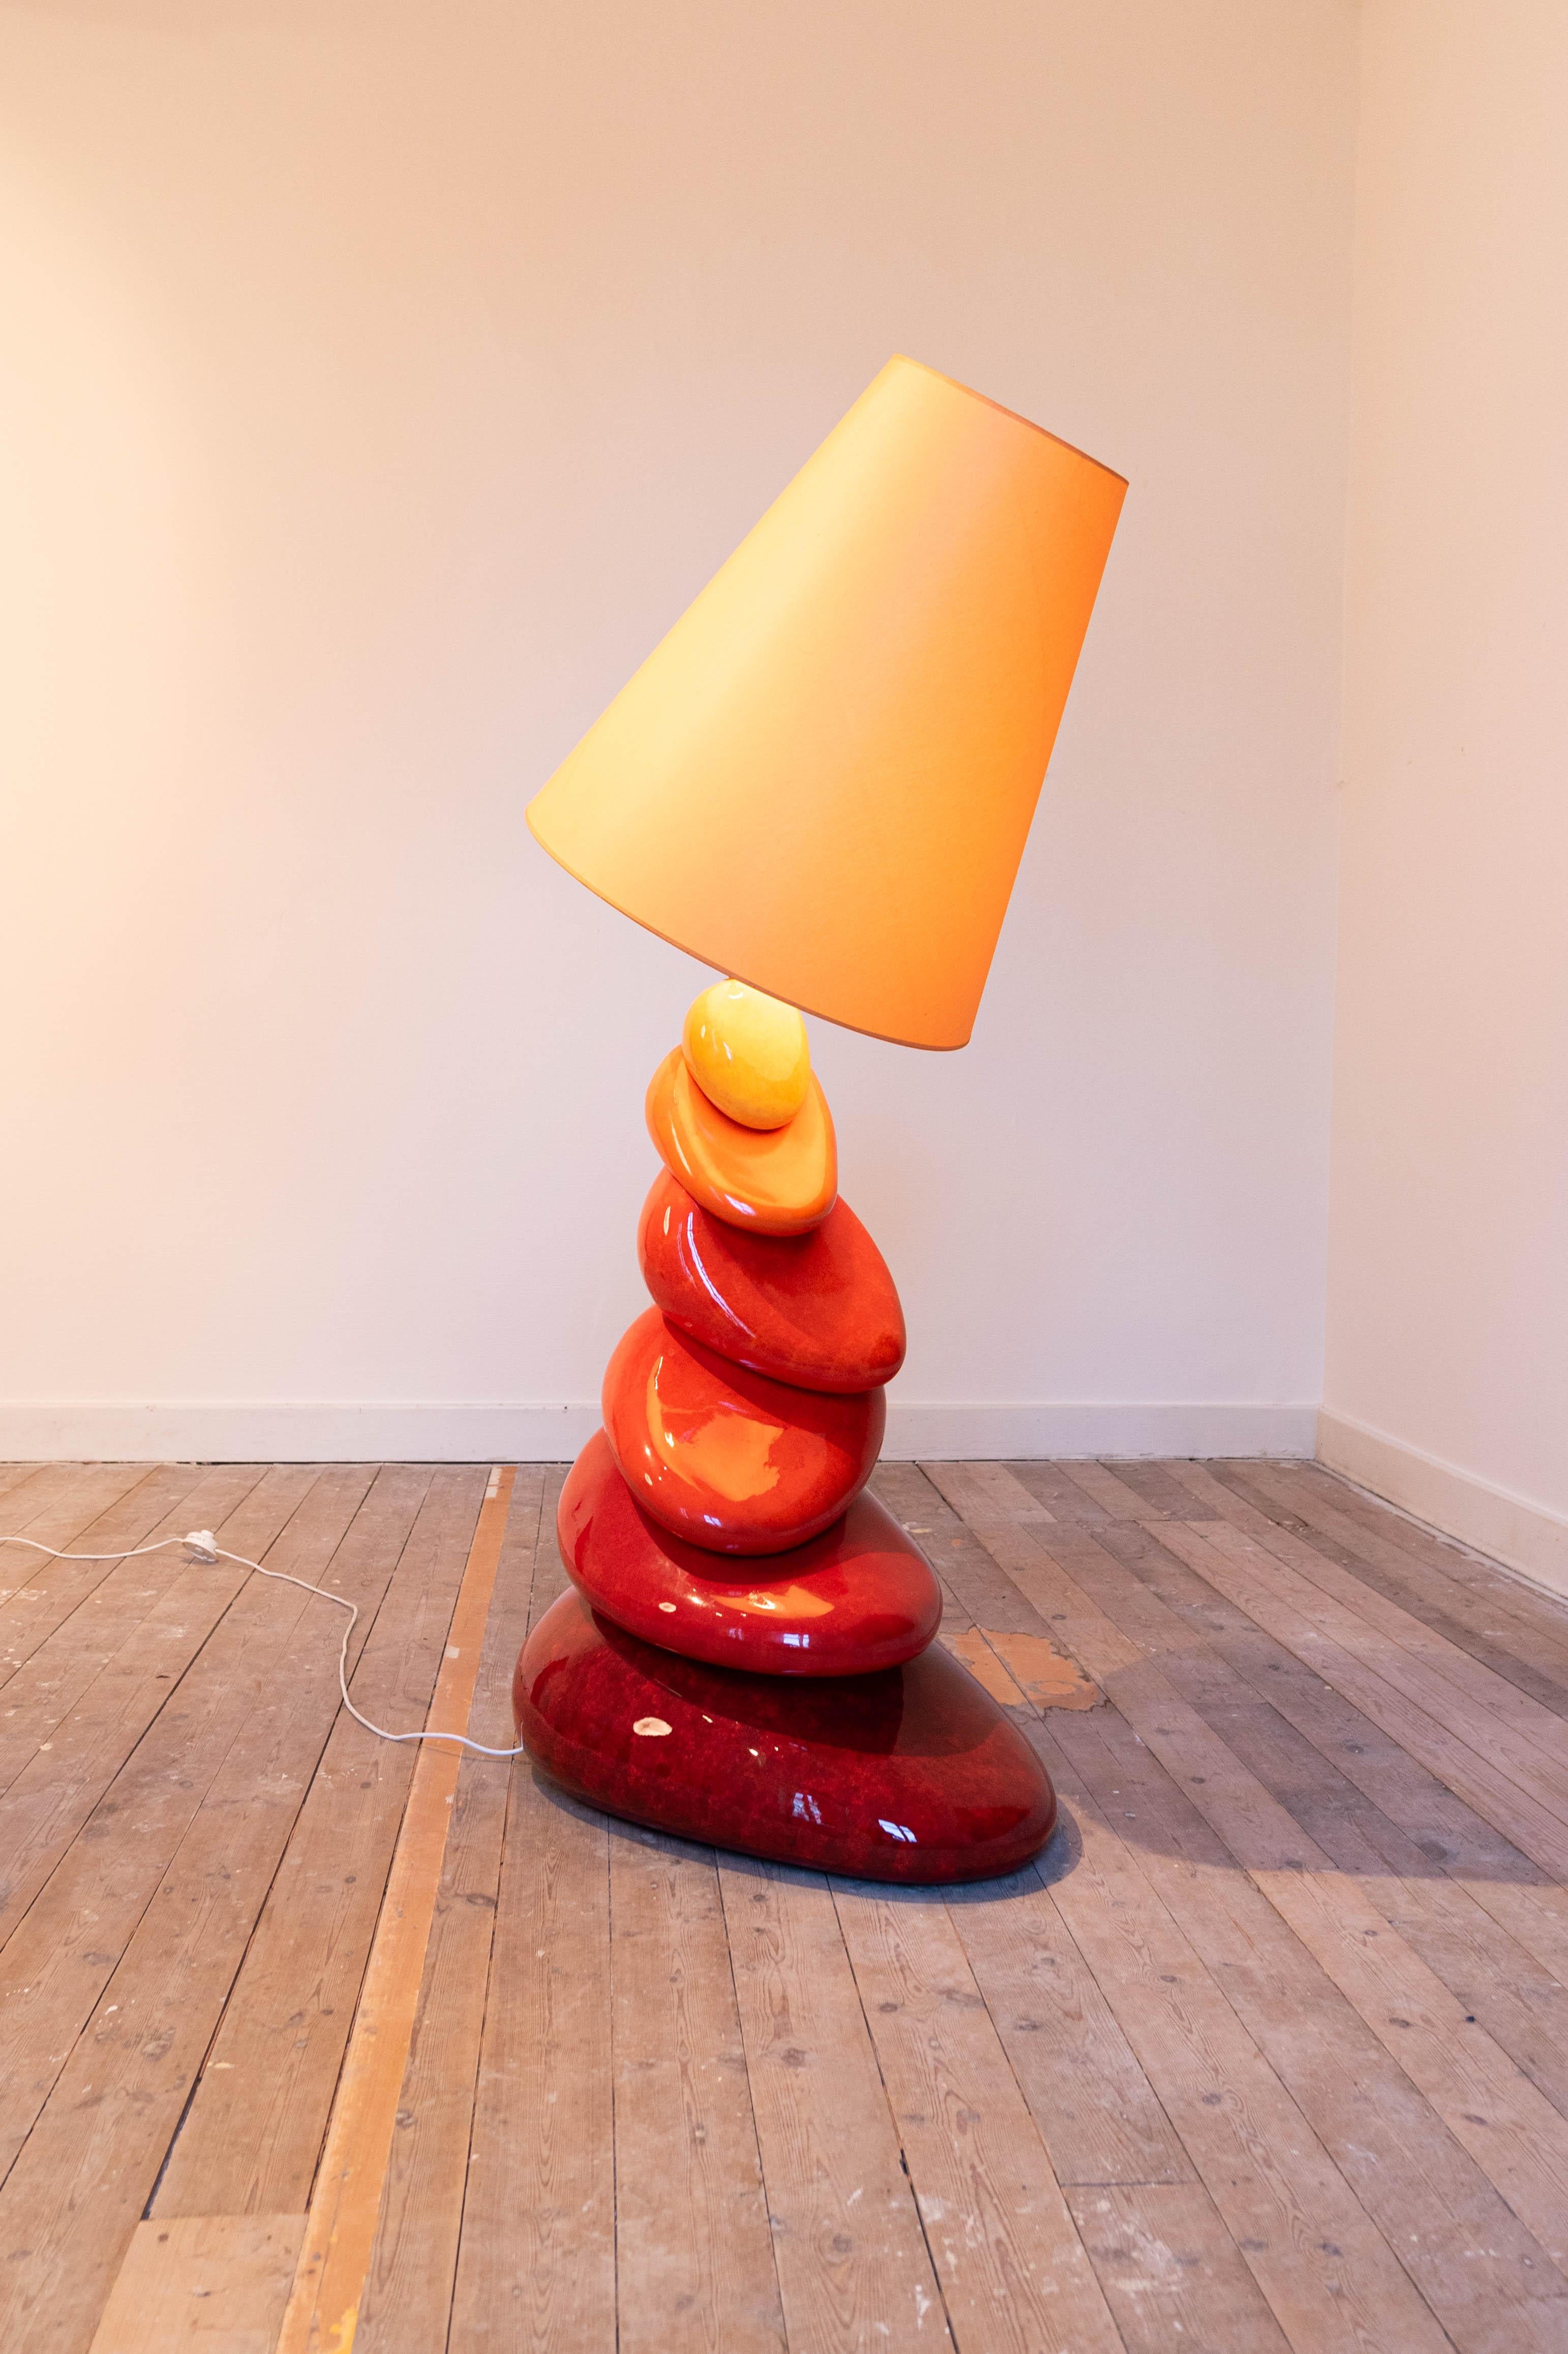 This mid-century pebble lamp by François Chatain is a real classic, but this XXL size is very rare. The lampshade was deliberately positioned off-center by the artist. 